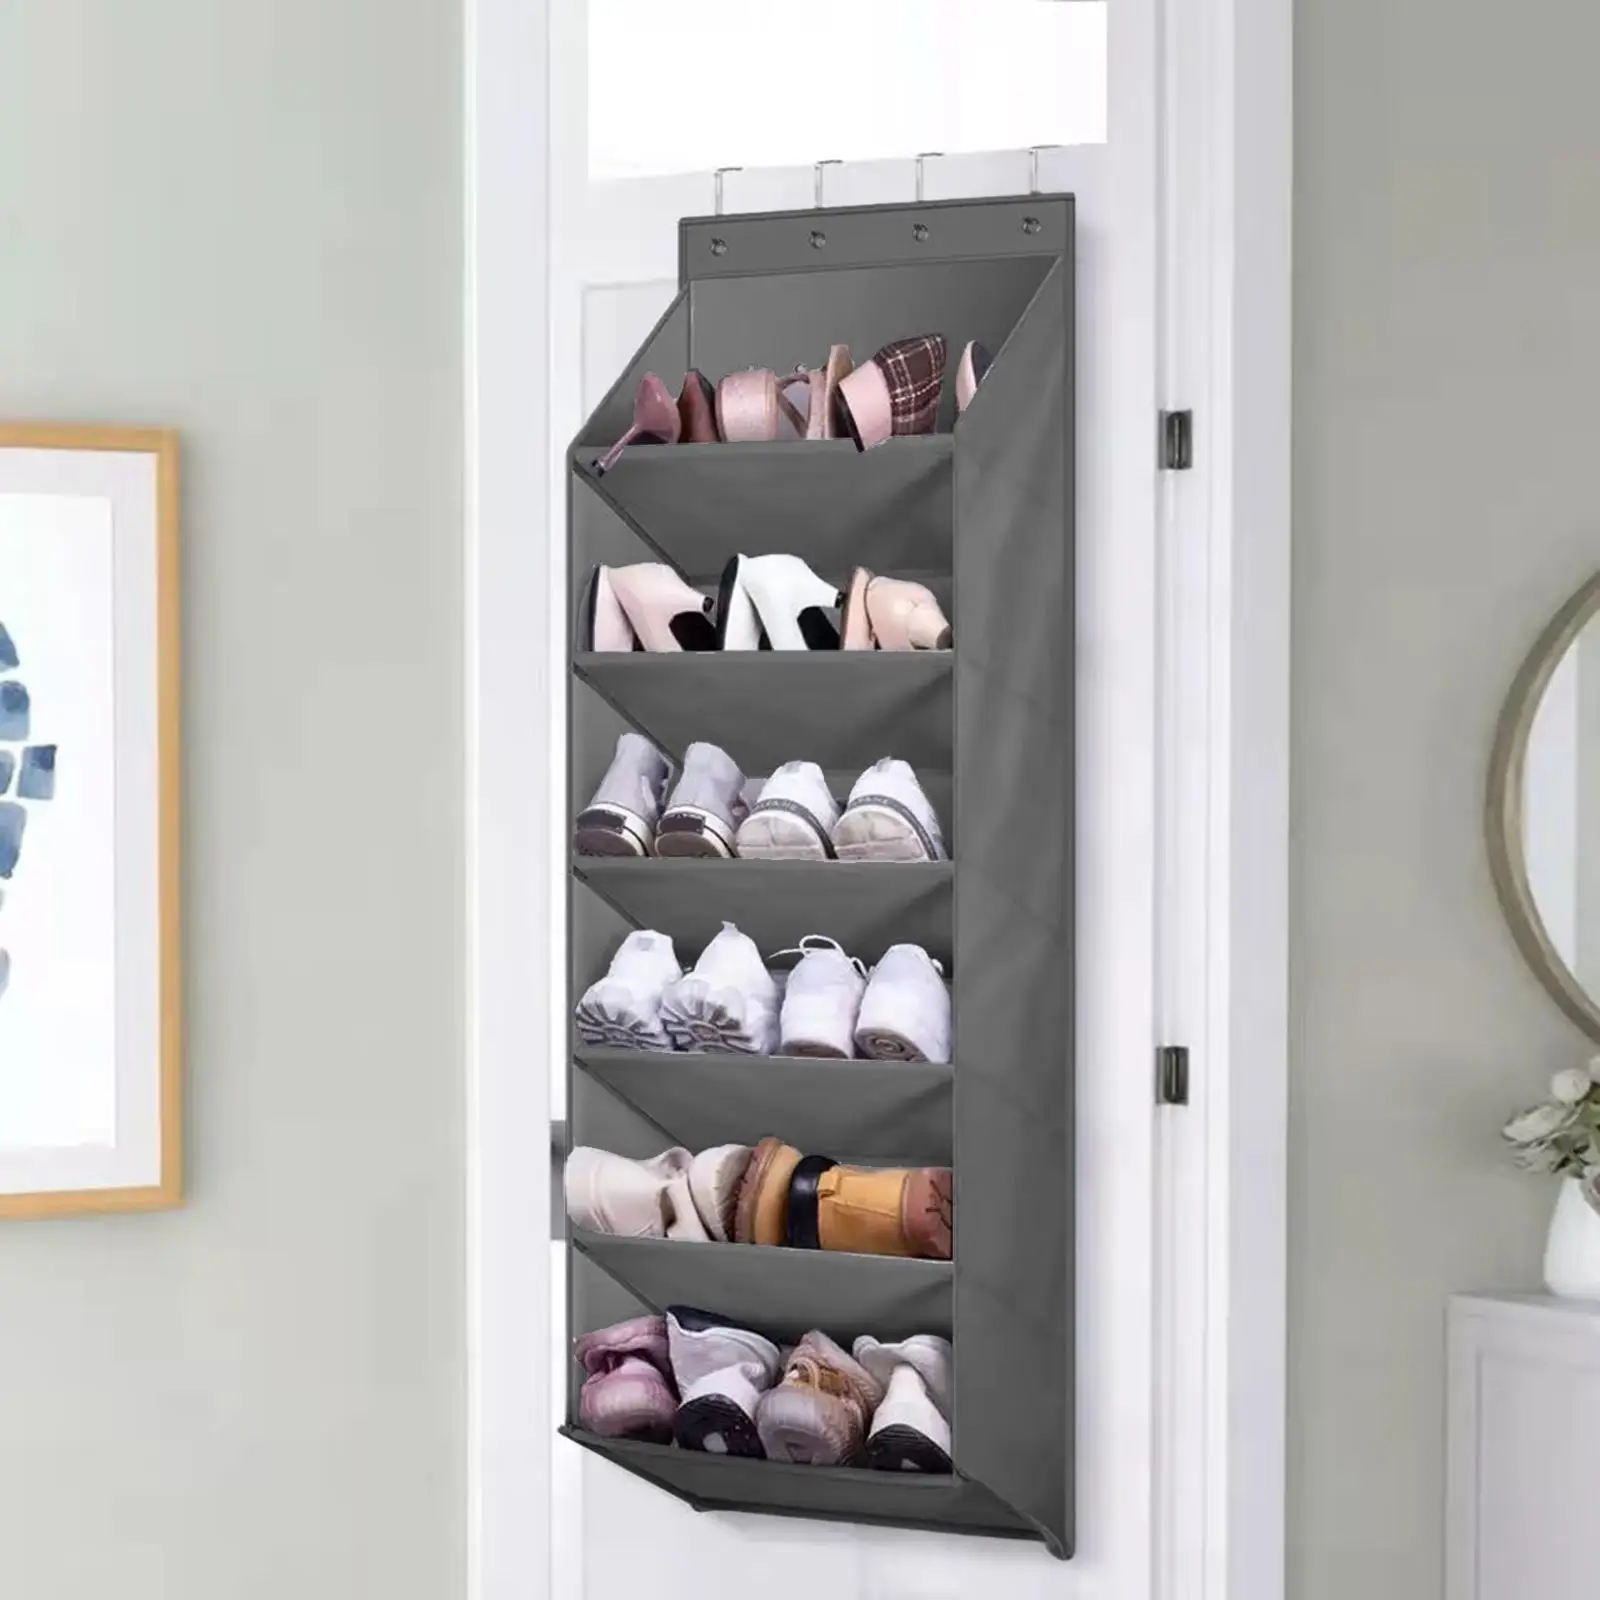 6 Tier Large Deep Pockets Door Shoe Rack with 4 Hooks Hanging Storage Bag for Closet Door for Toys 16 Pair Shoes Hats Baby Items